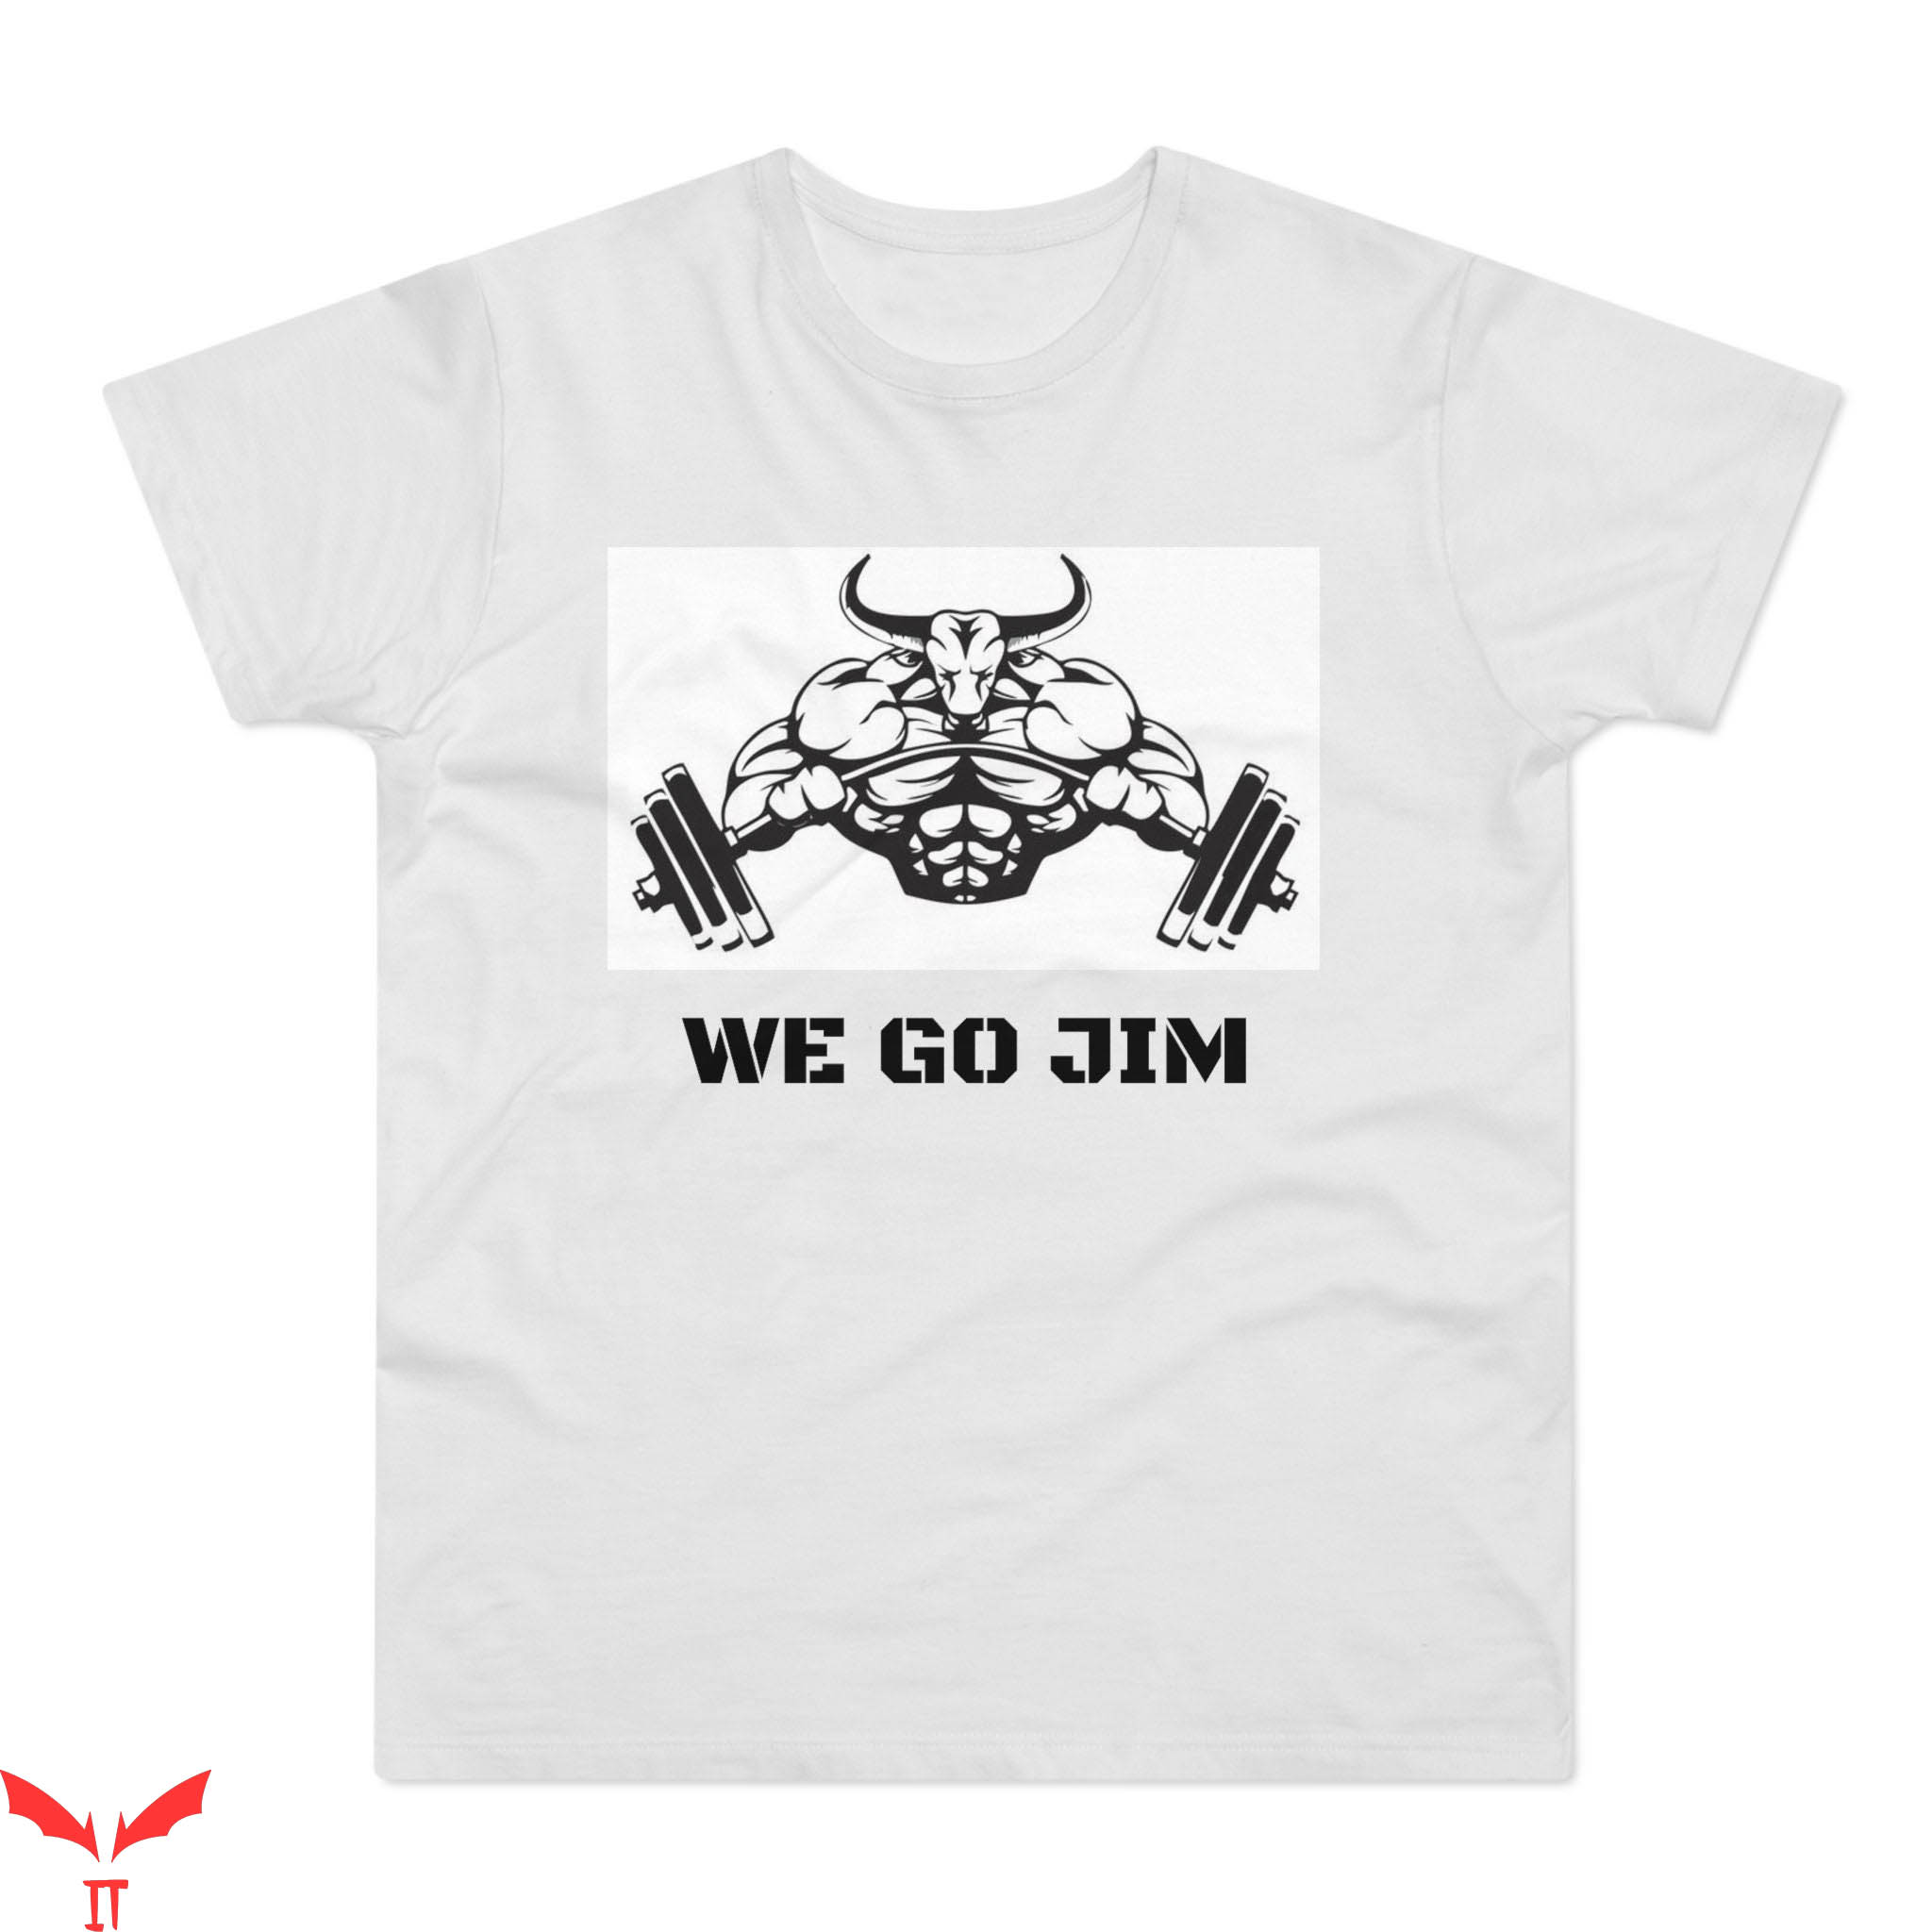 We Go Jim T-Shirt Funny Workout Gym Workout Cool Tee